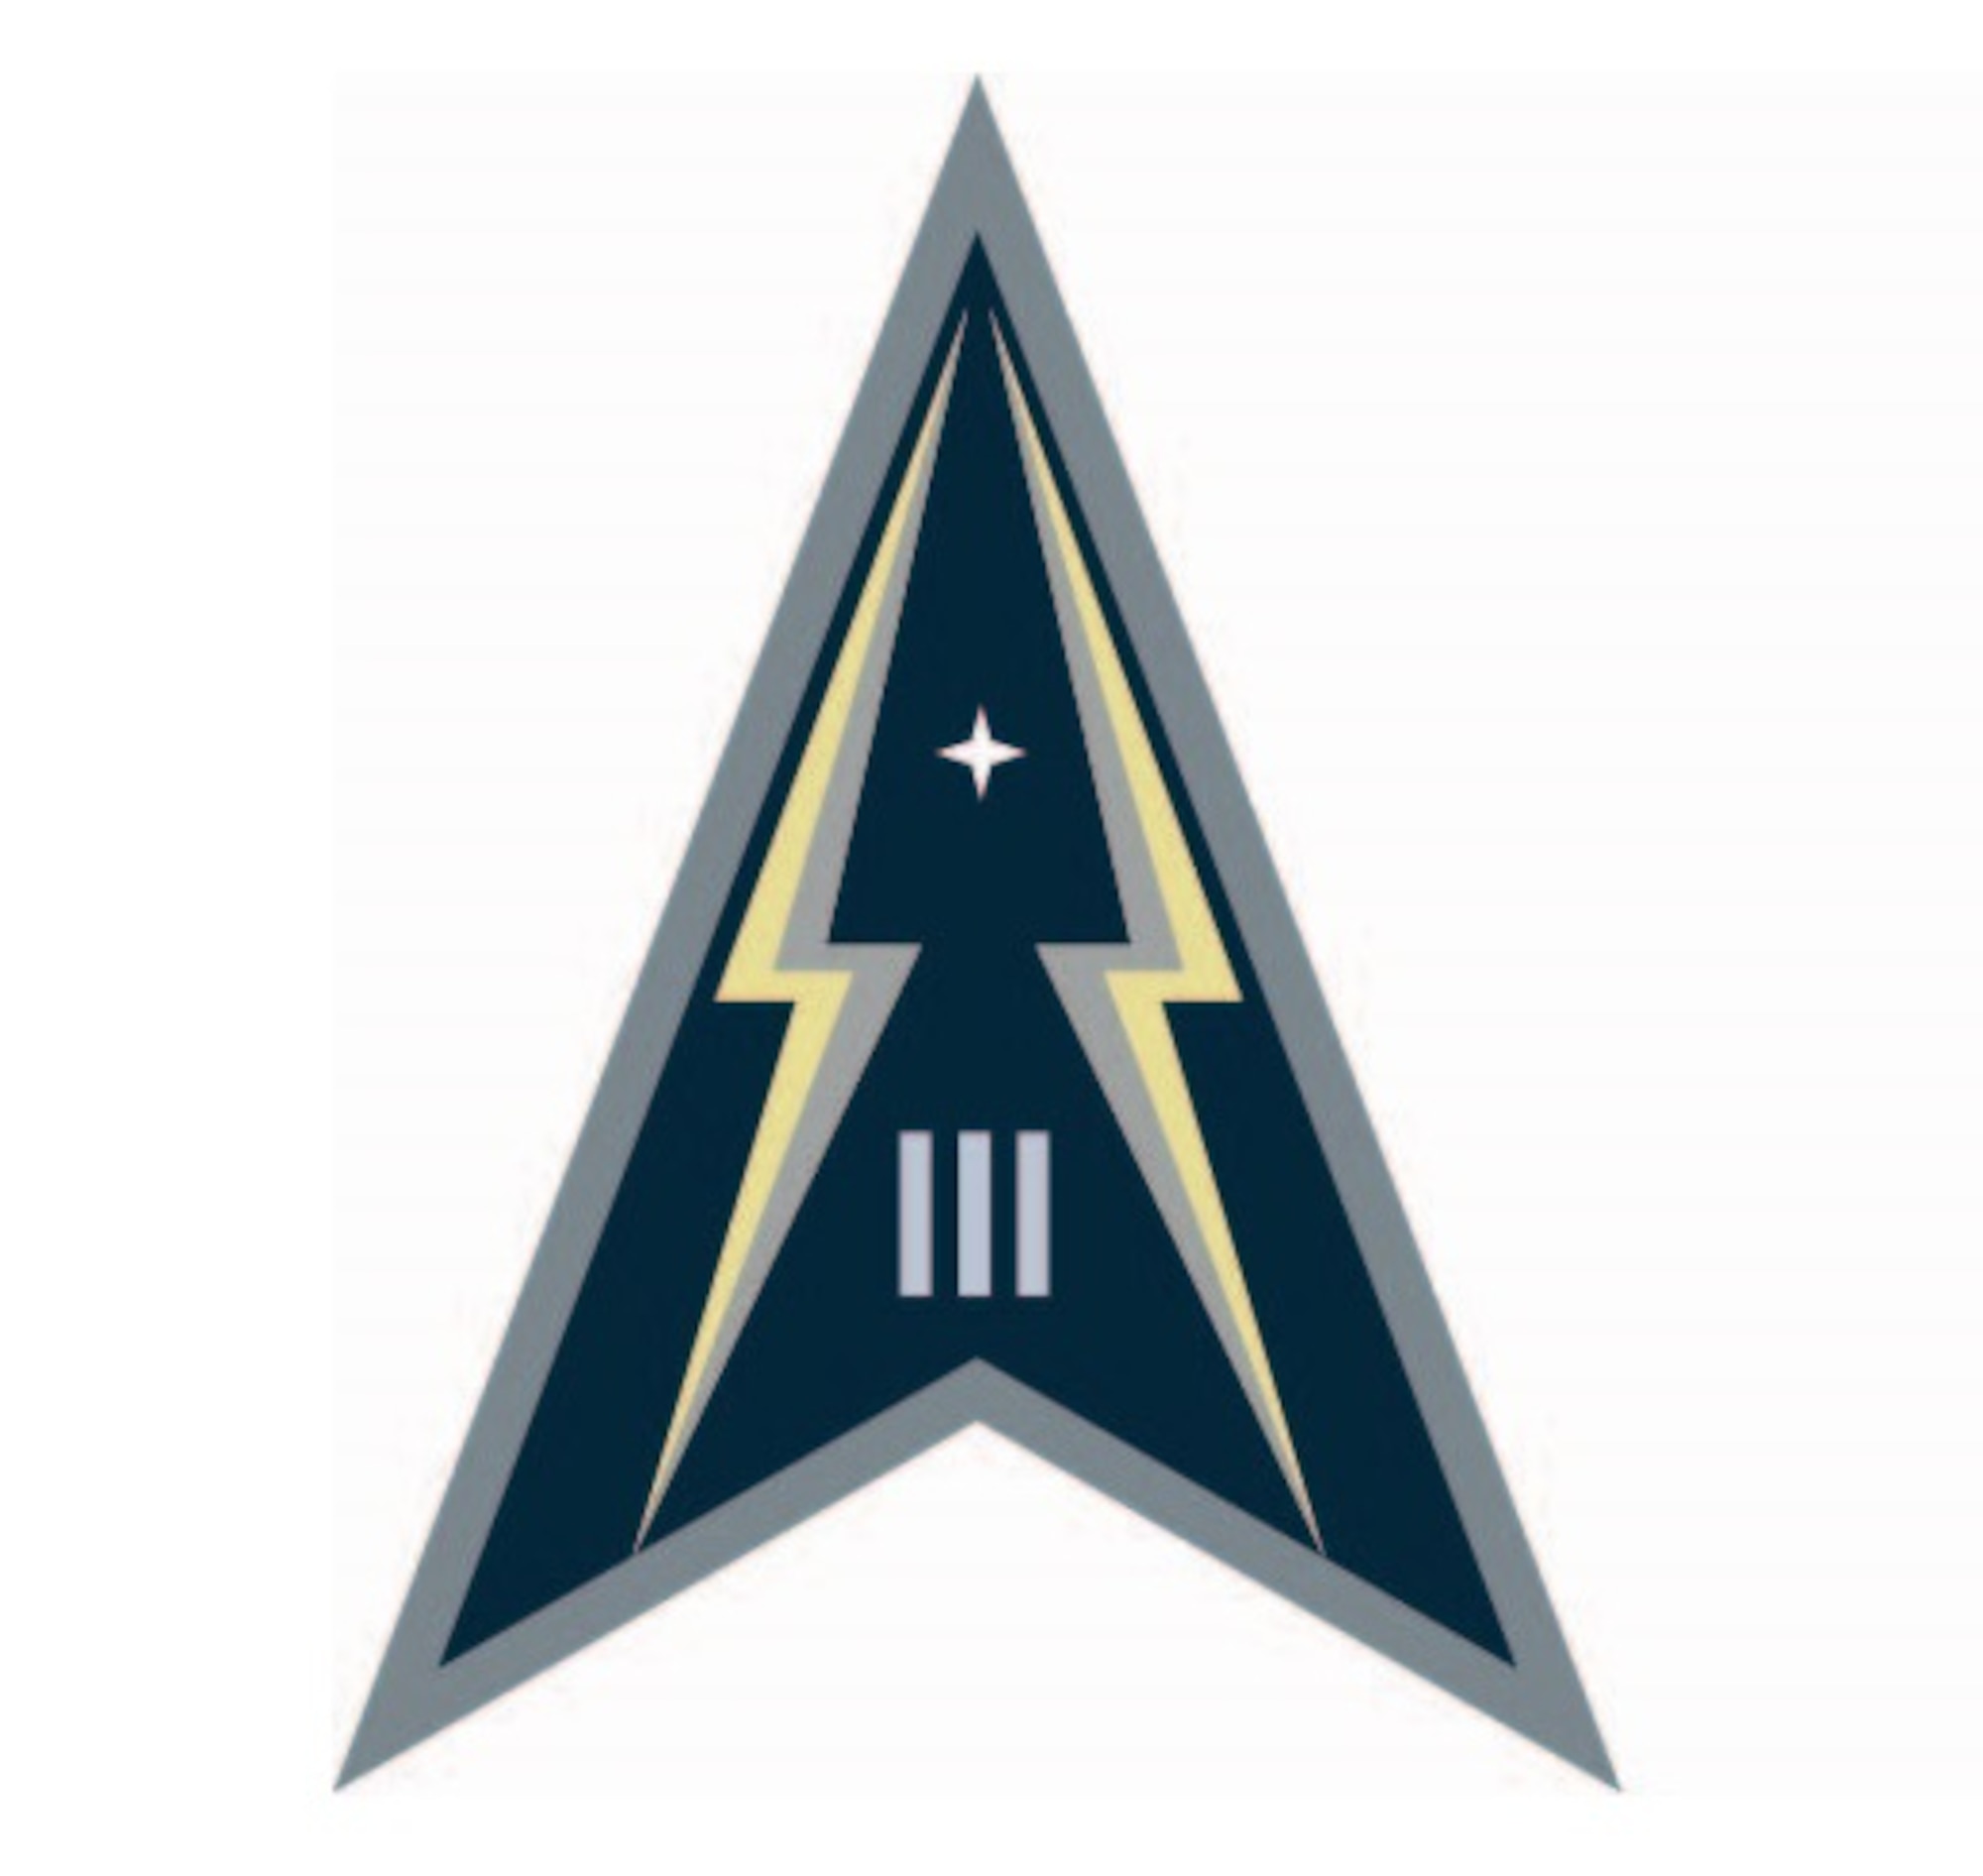 Space Delta 3 Factsheet > Peterson and Schriever Space Force Base > Display